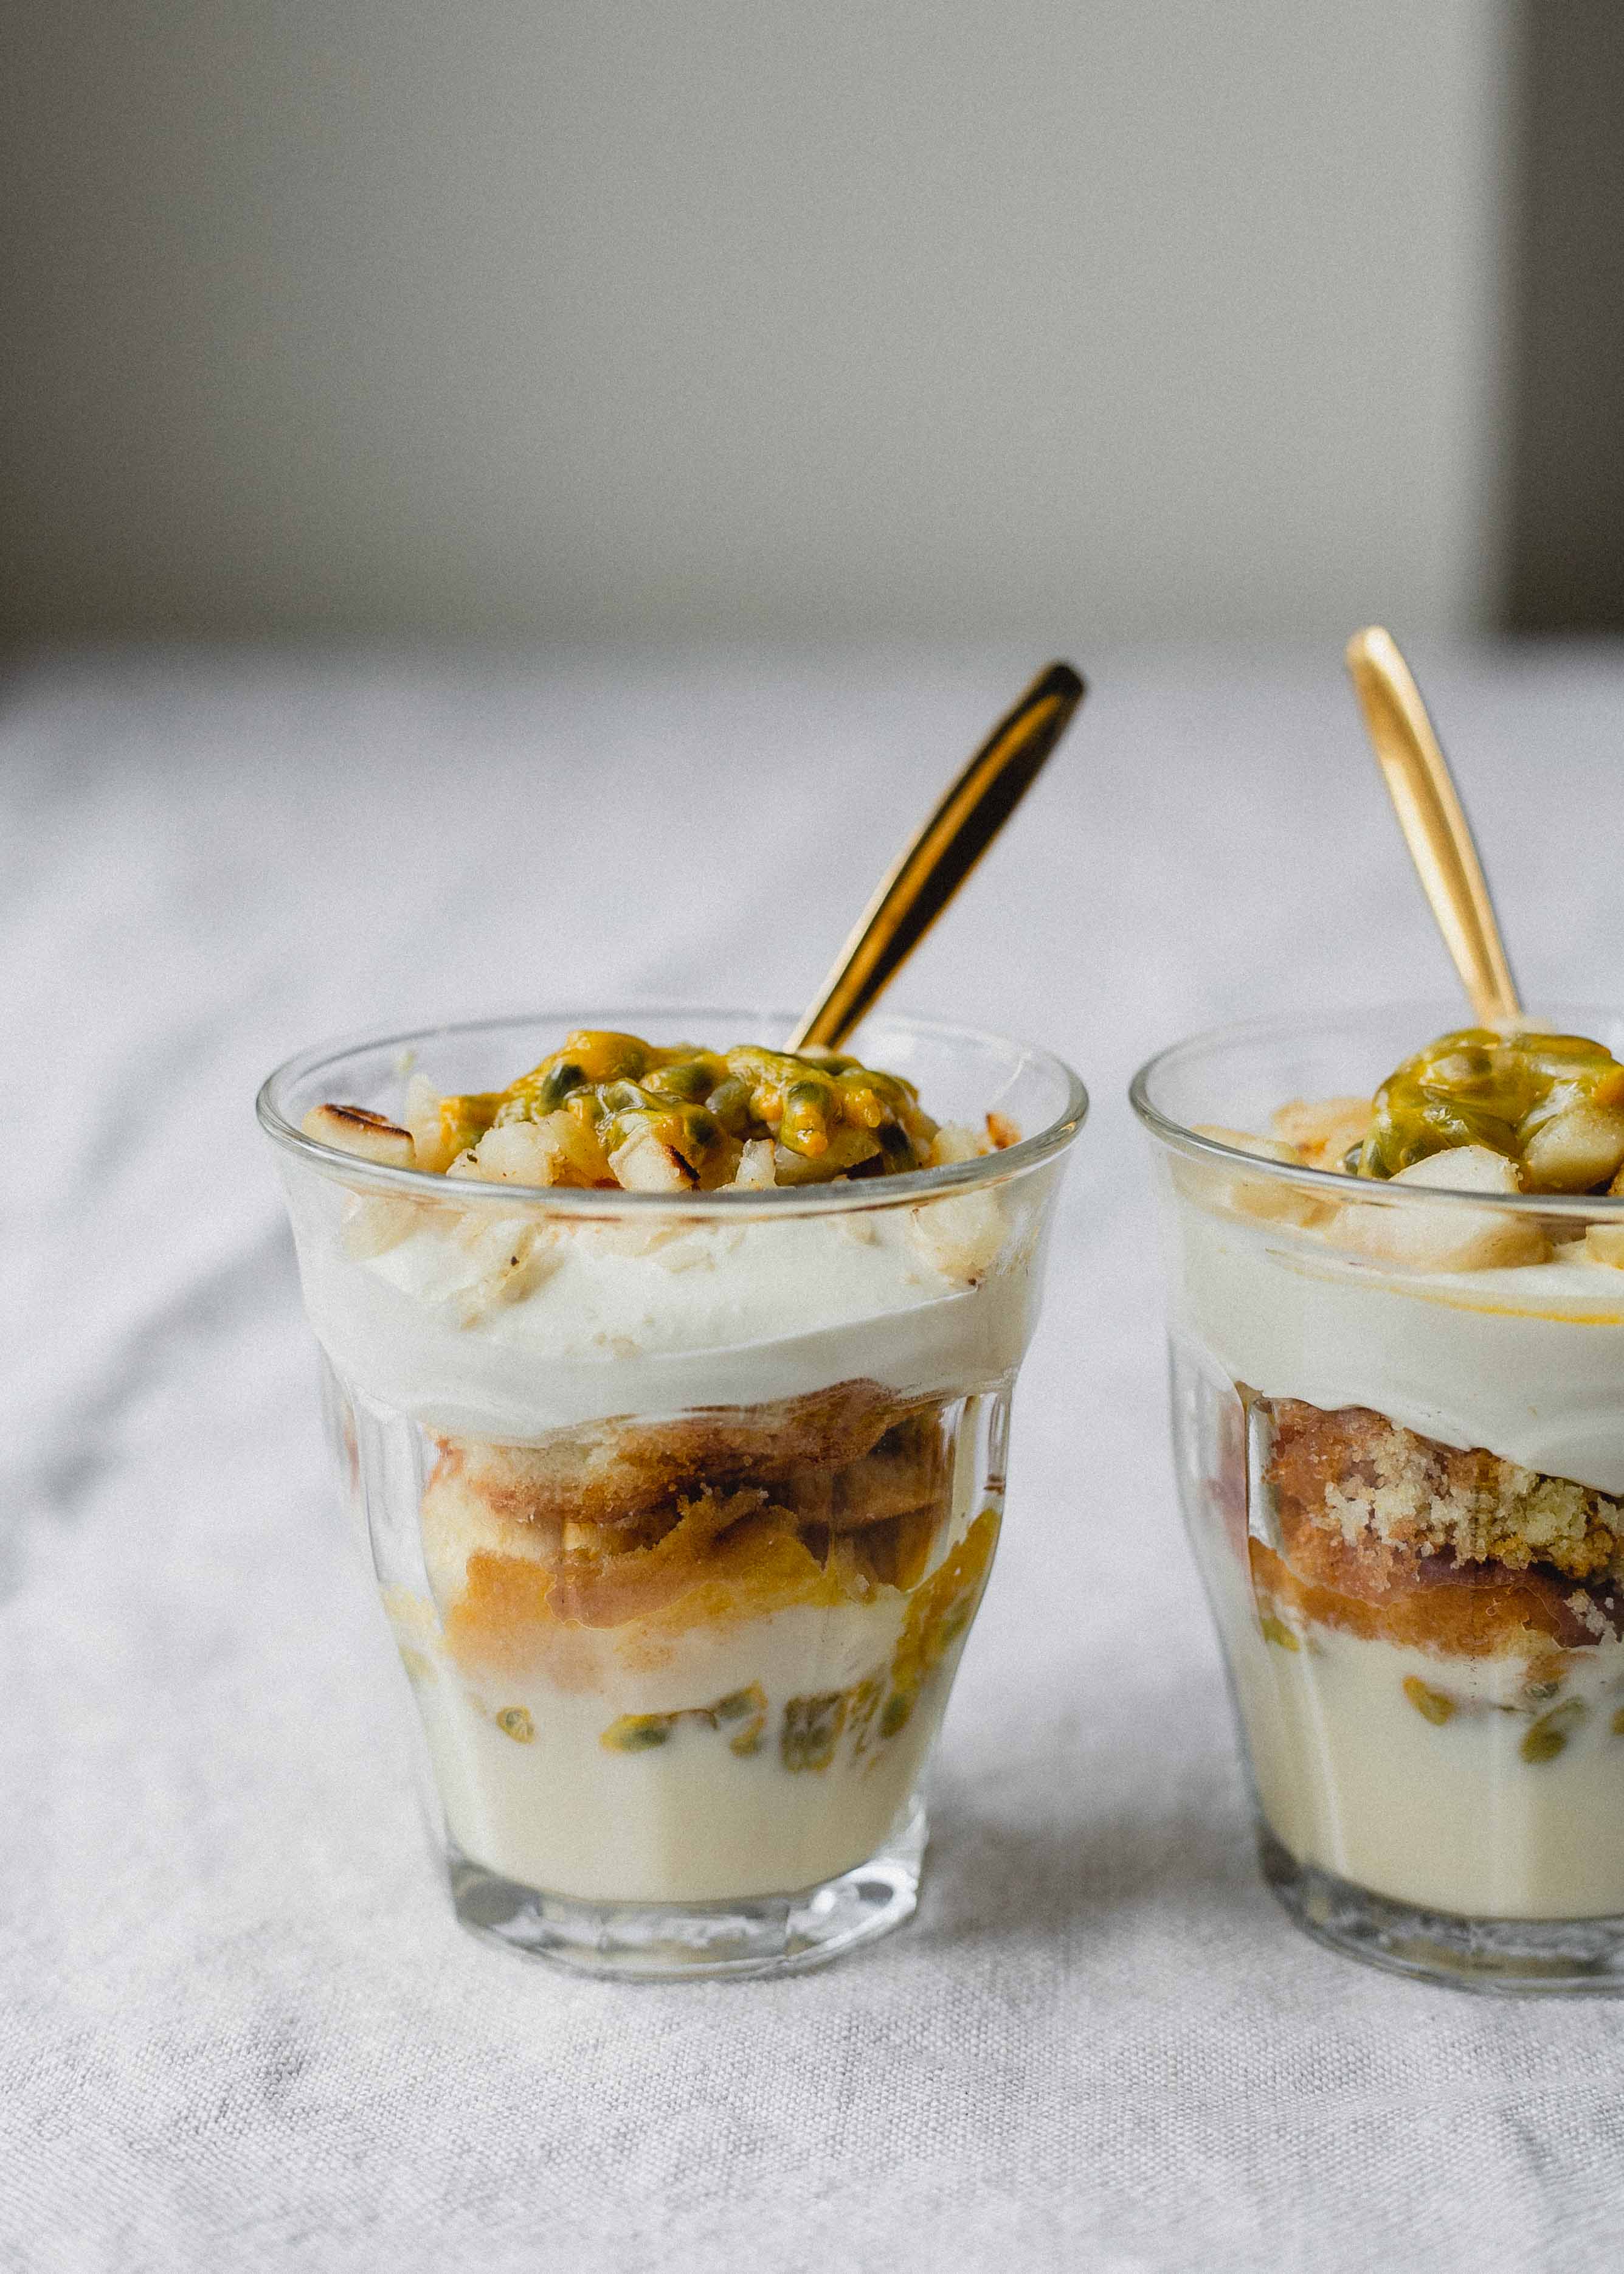 FODMAP friendly passionfruit and kefir pudding